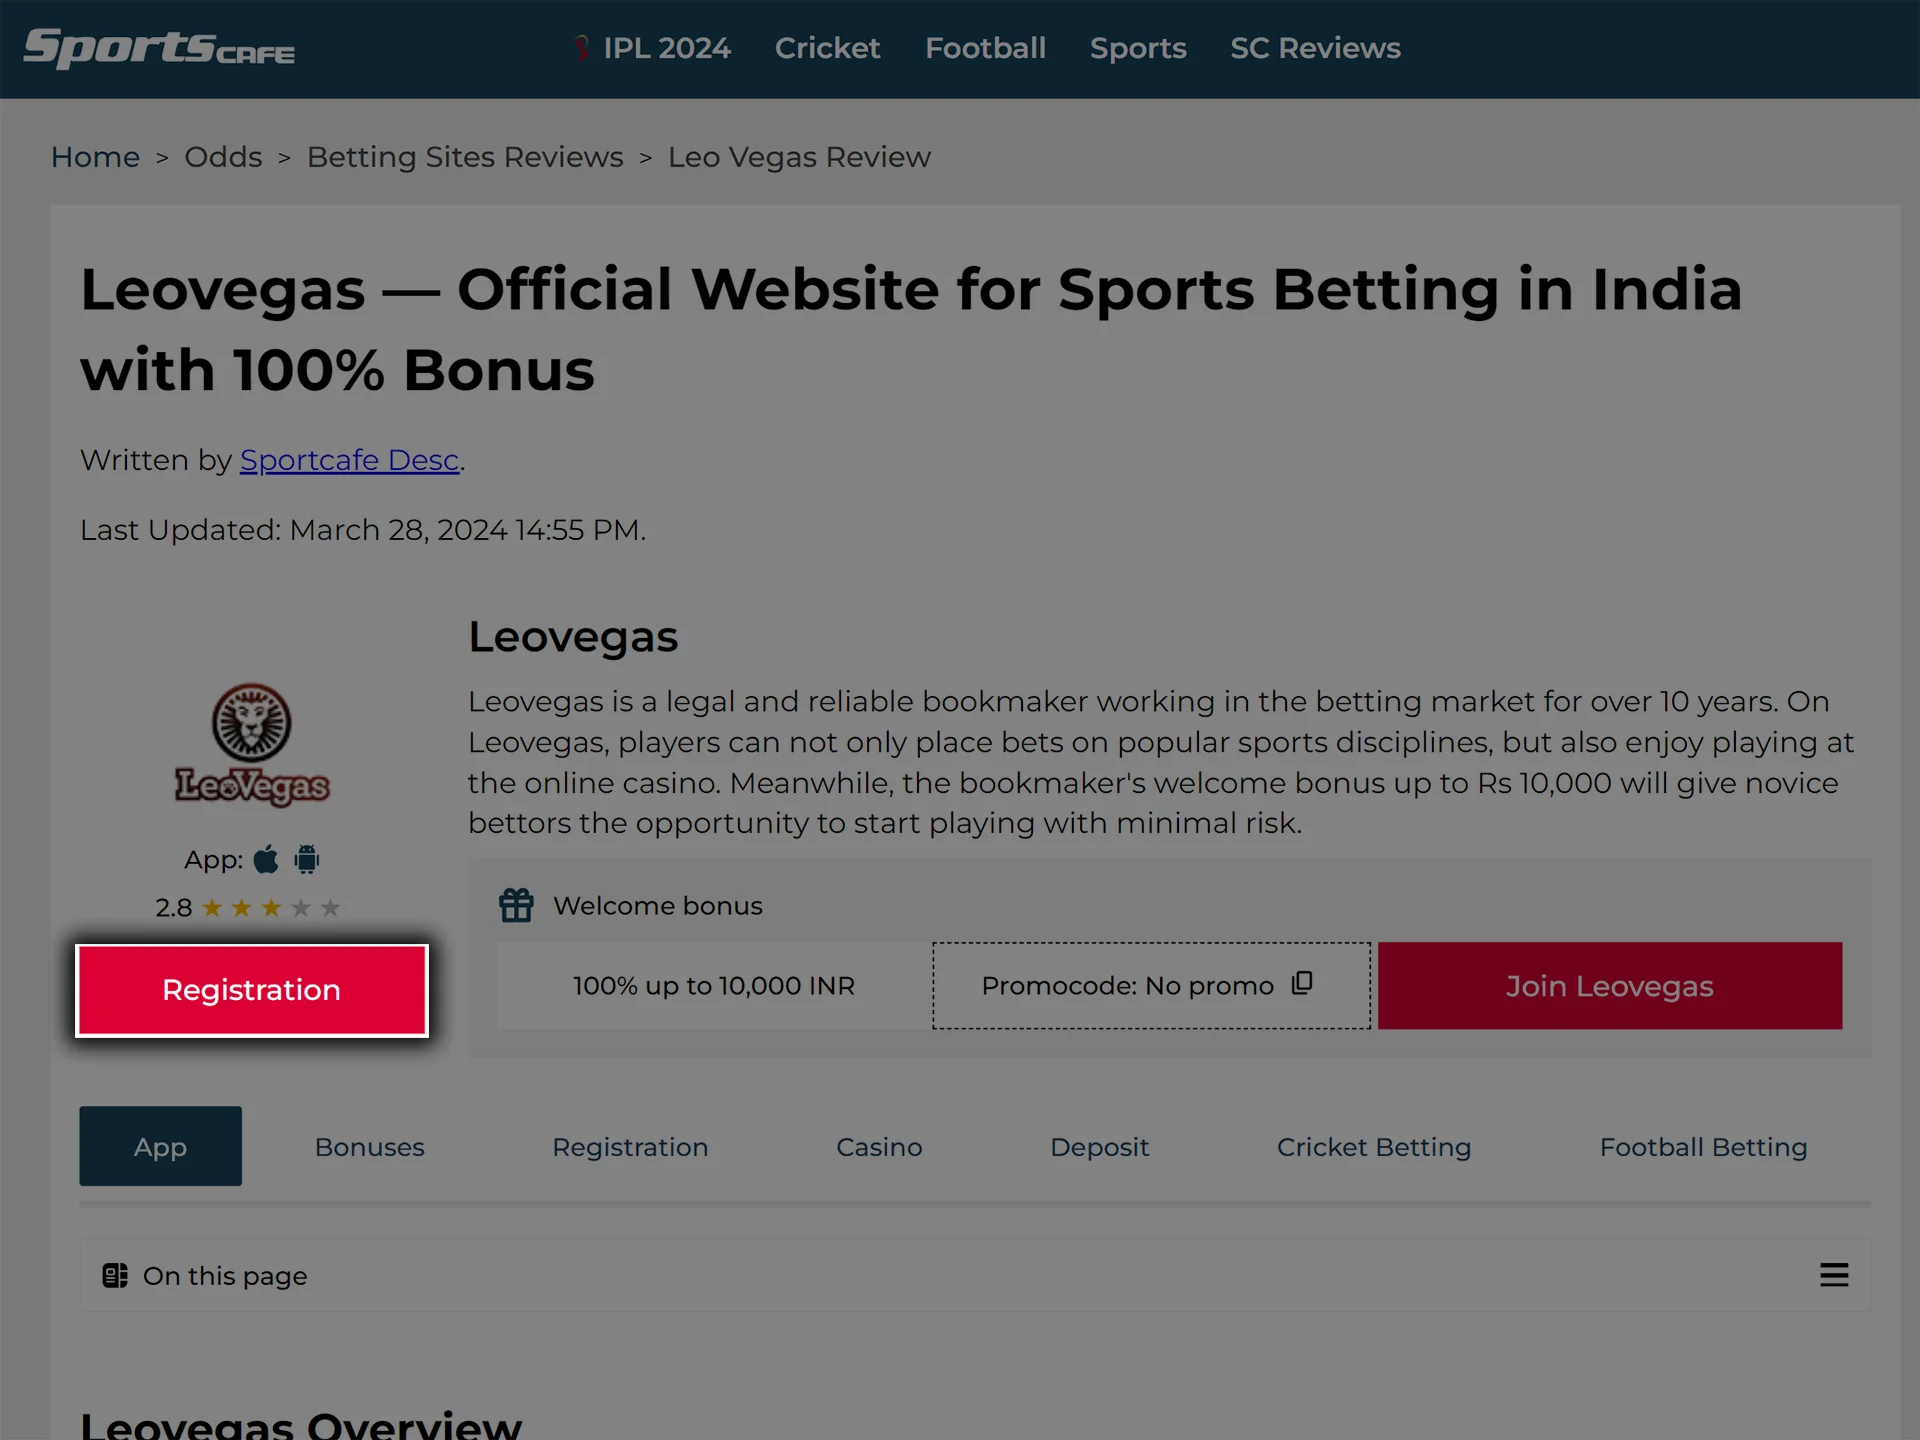 Go to the Leovegas website using the link in the review header.